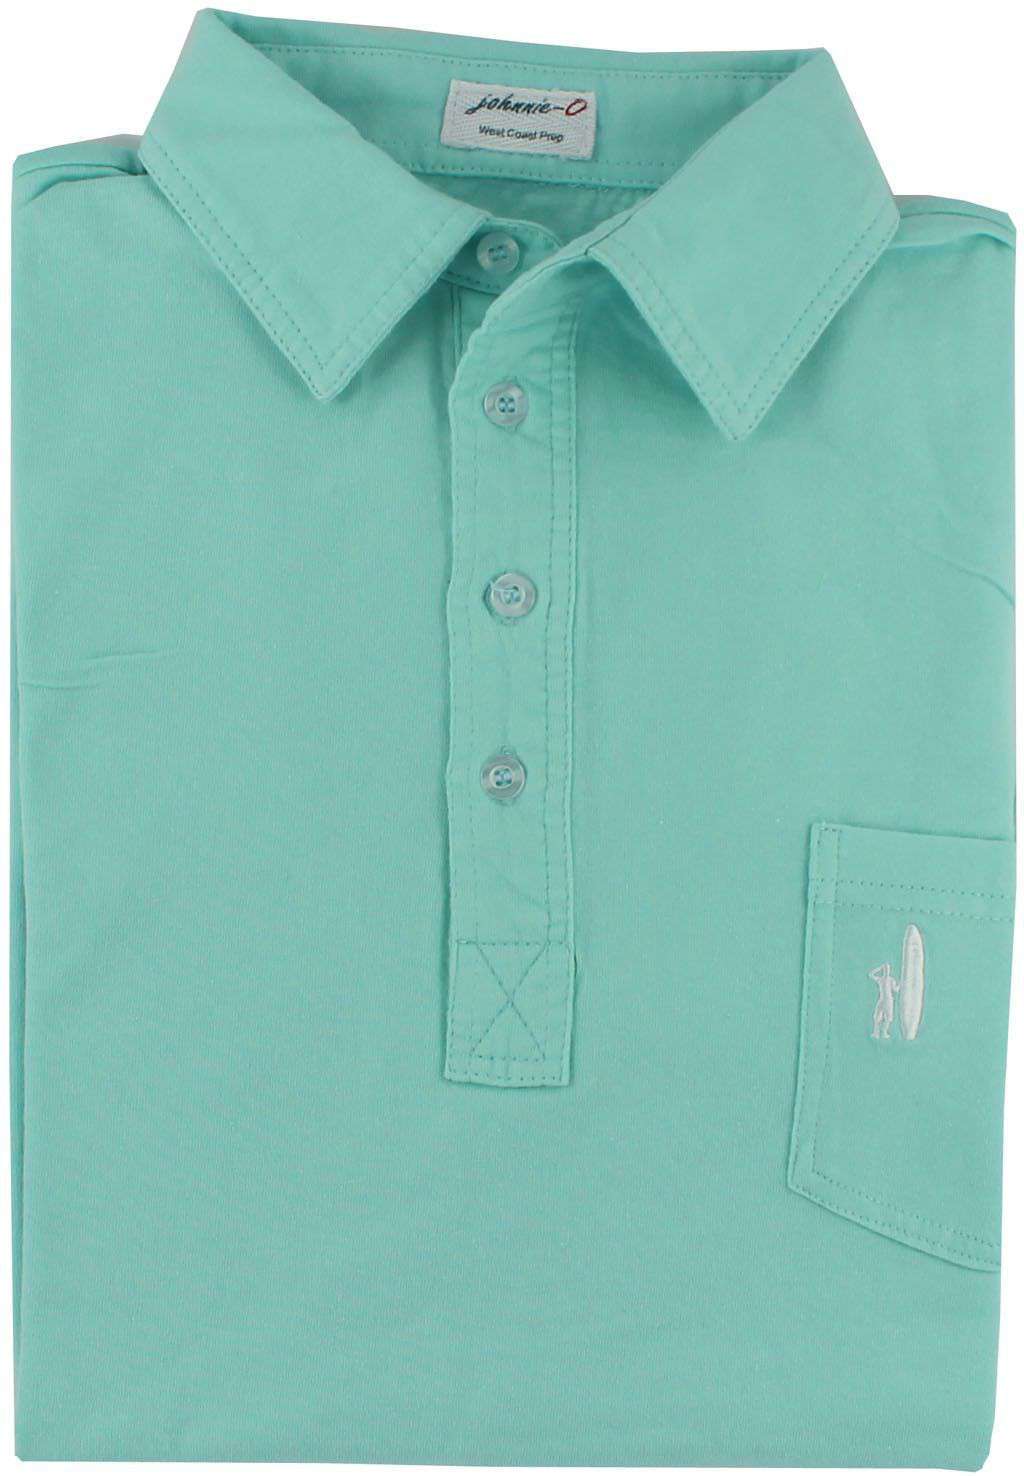 The 4-Button Polo in Poison Blue/Green by Johnnie-O - Country Club Prep